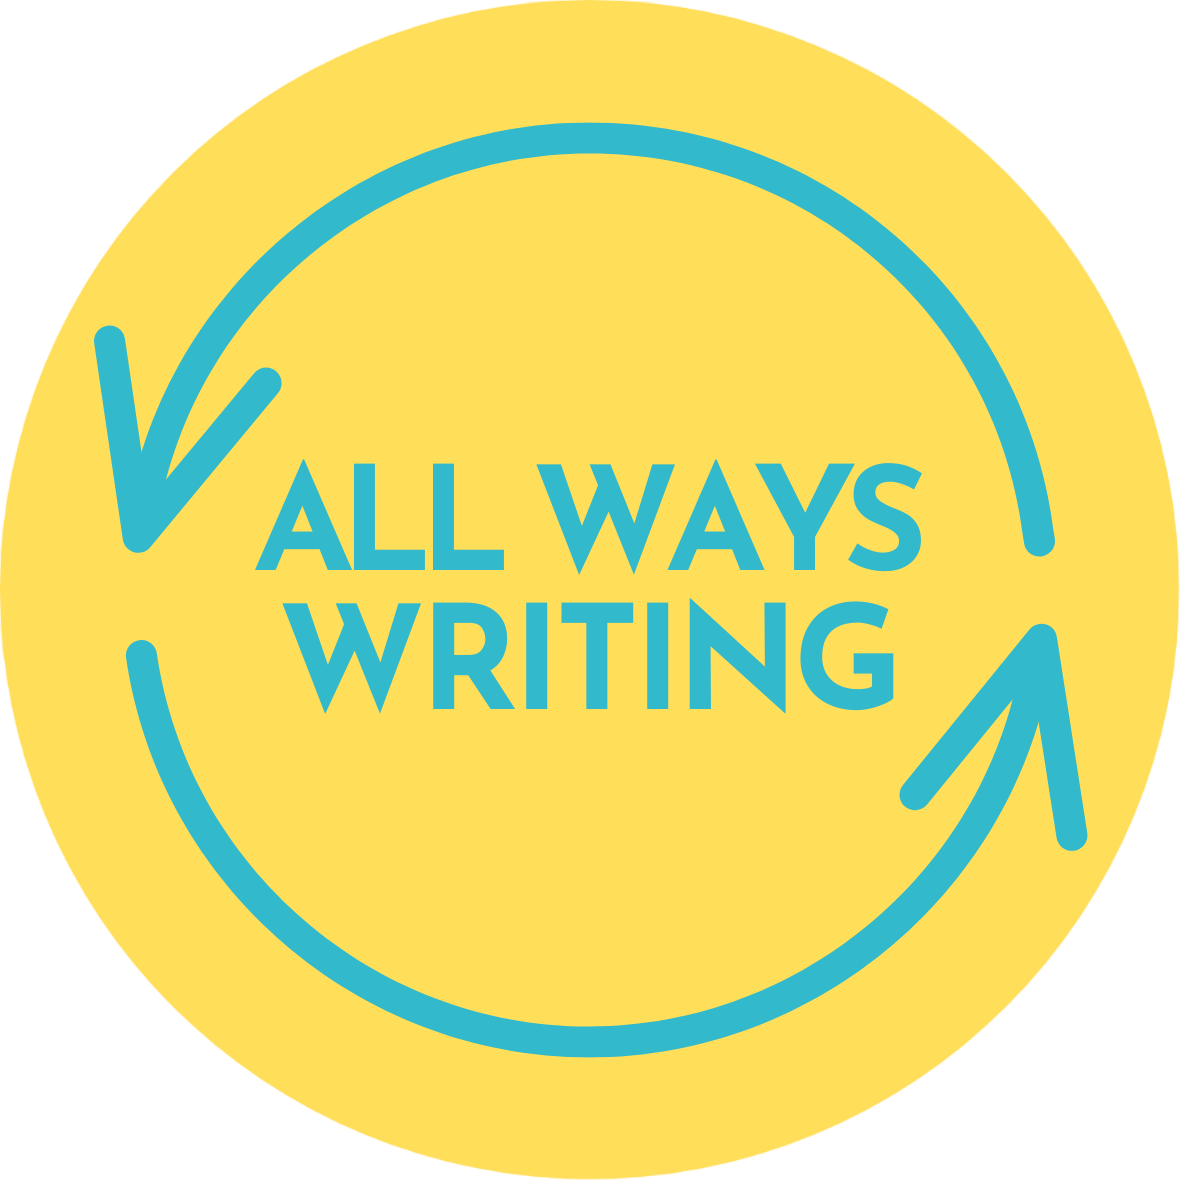 All Ways Writing Collective